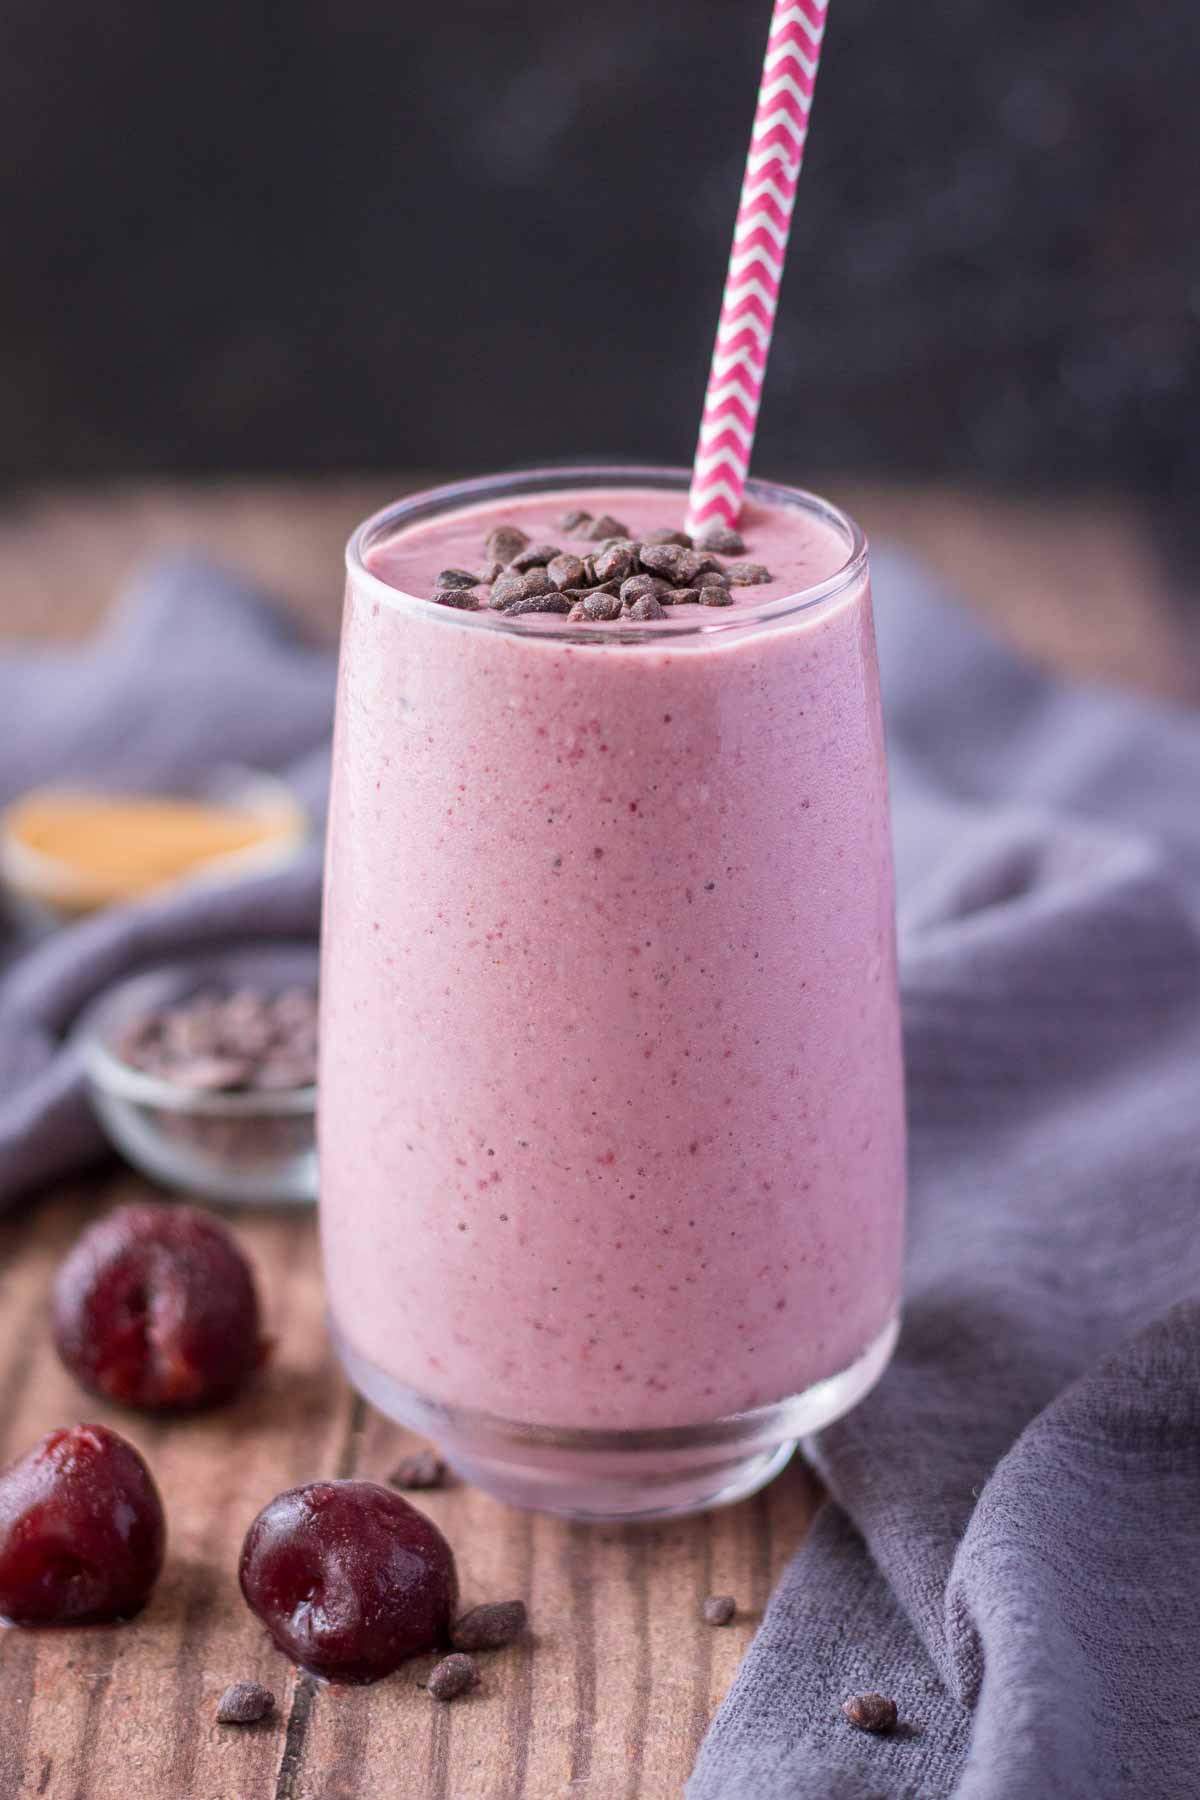 Cherry Banana Smoothie served in a glass with a straw topped with chocolate